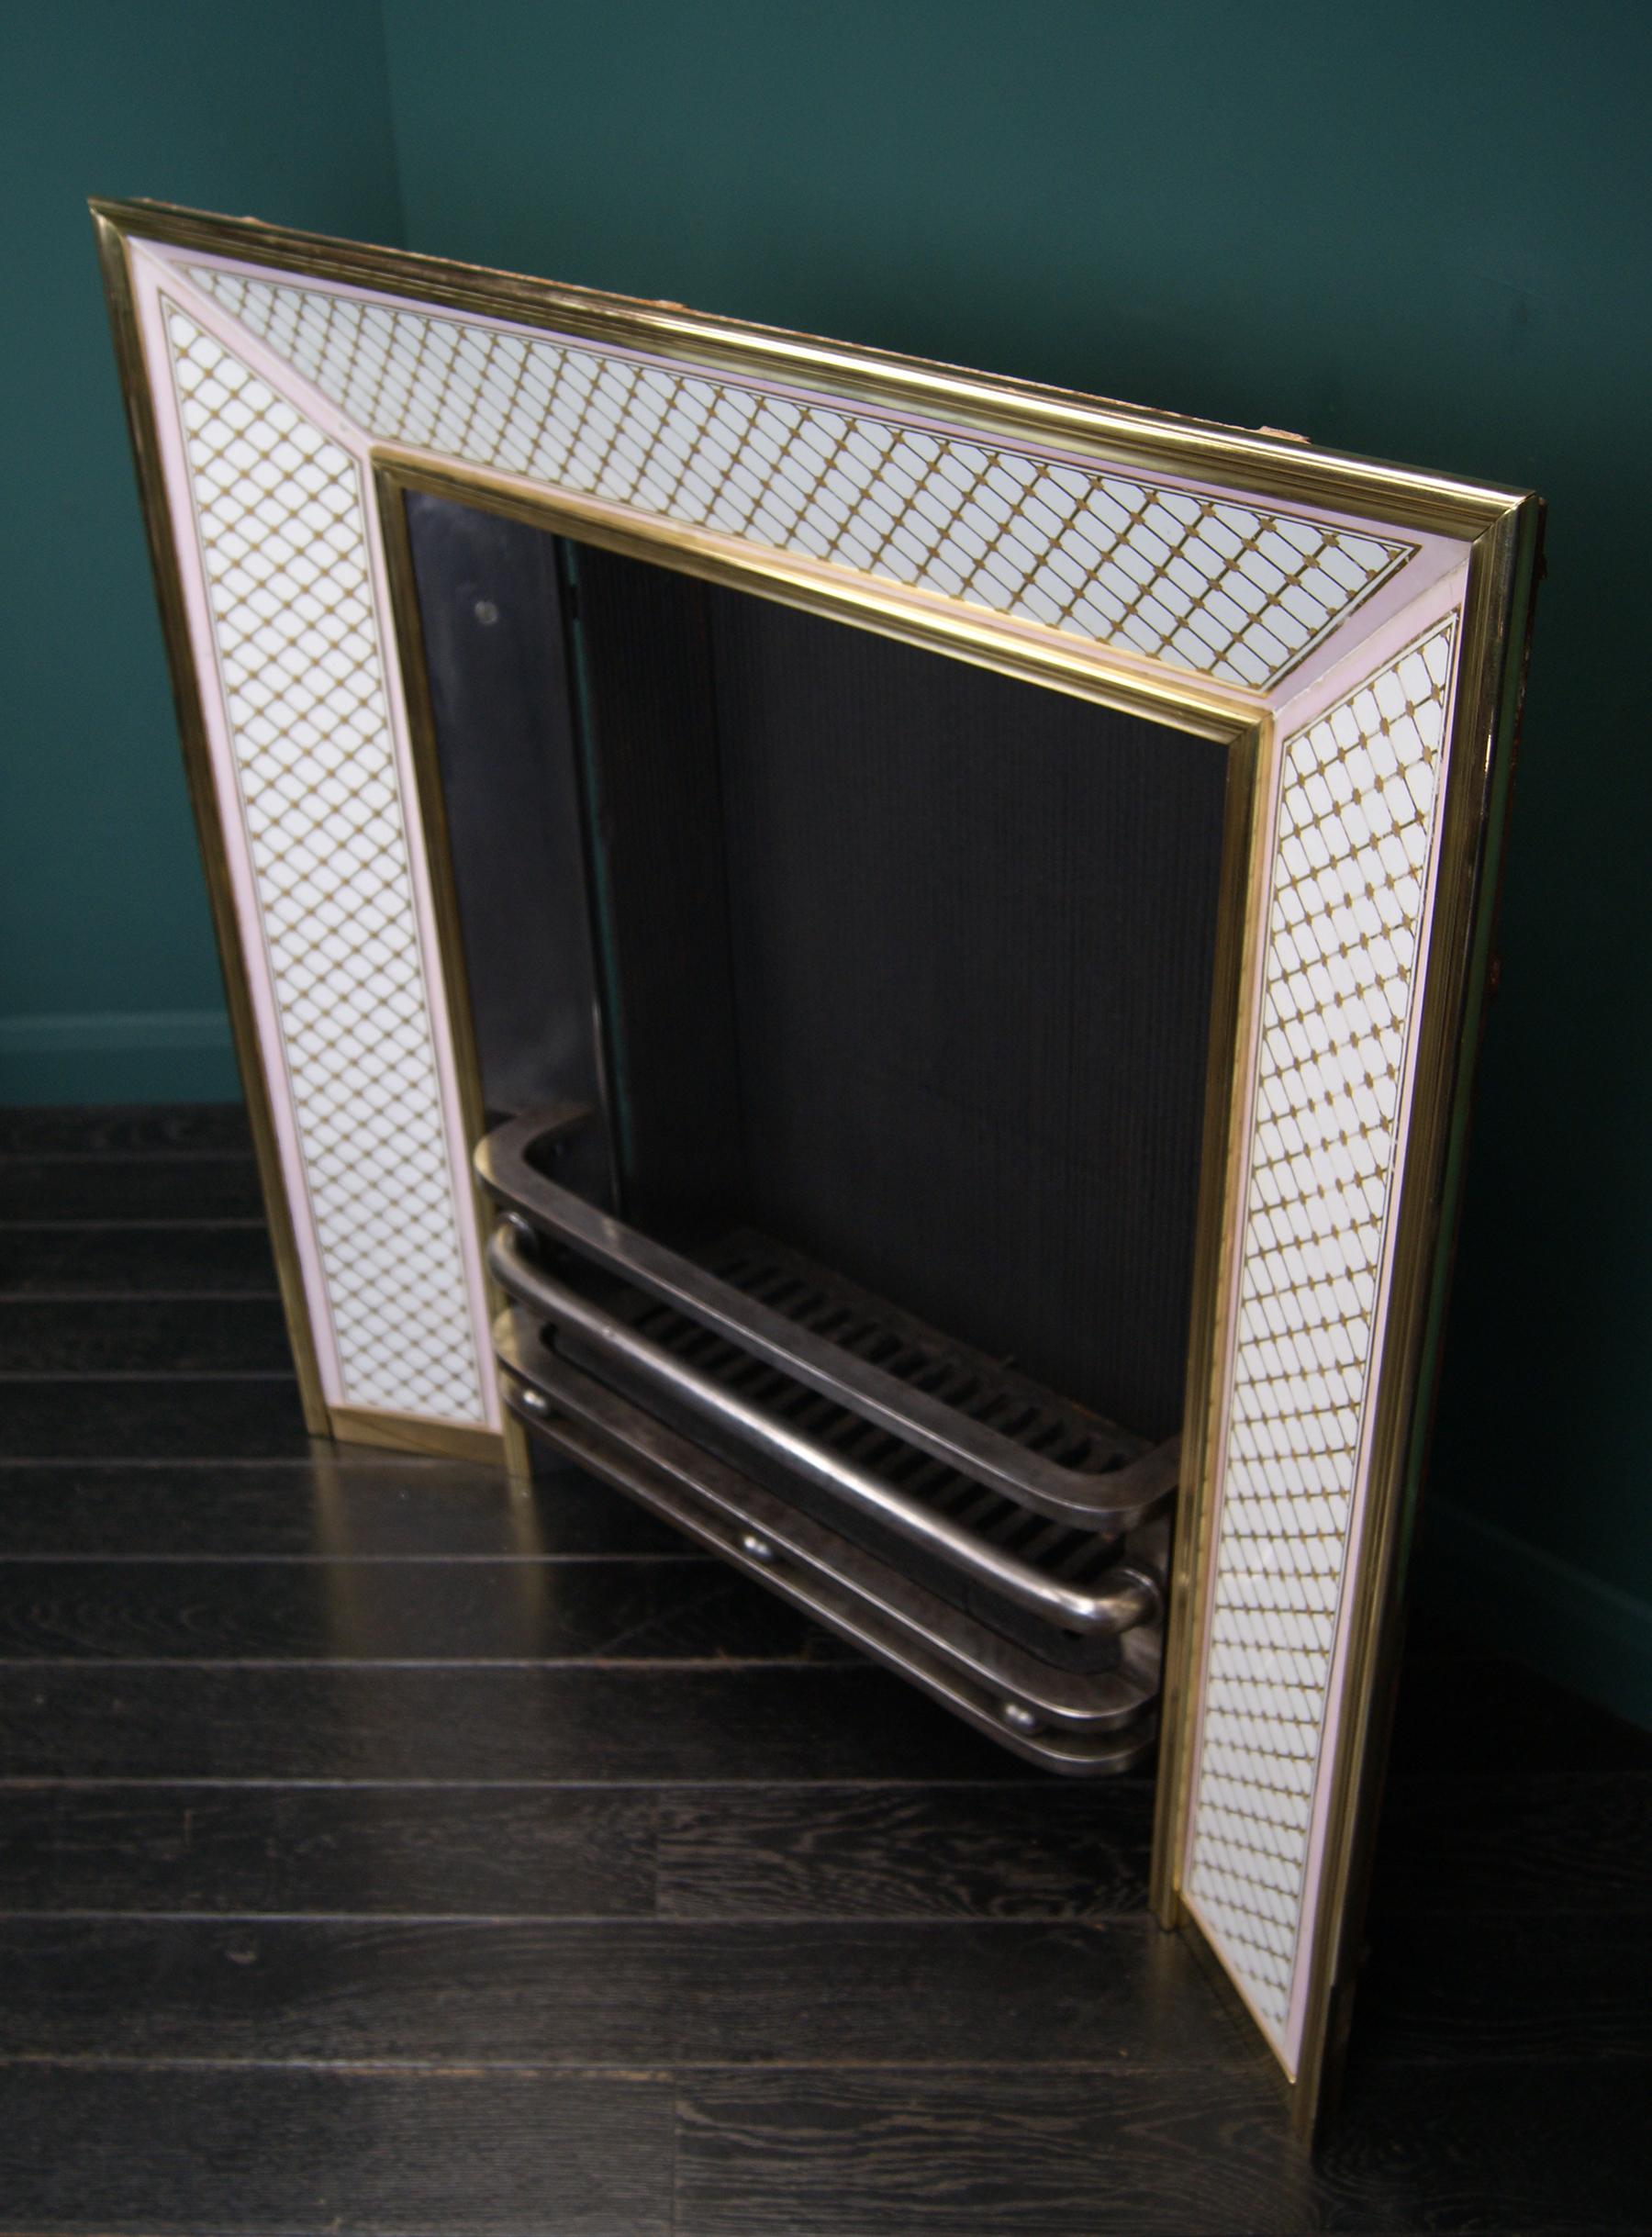 A fine Regency full register grate with pink and white ceramic panels. The ceramic panels are adorned with gold lattice-work framed with a pink border, set between bold brass mouldings. The removable front basket is formed in polished wrought-iron